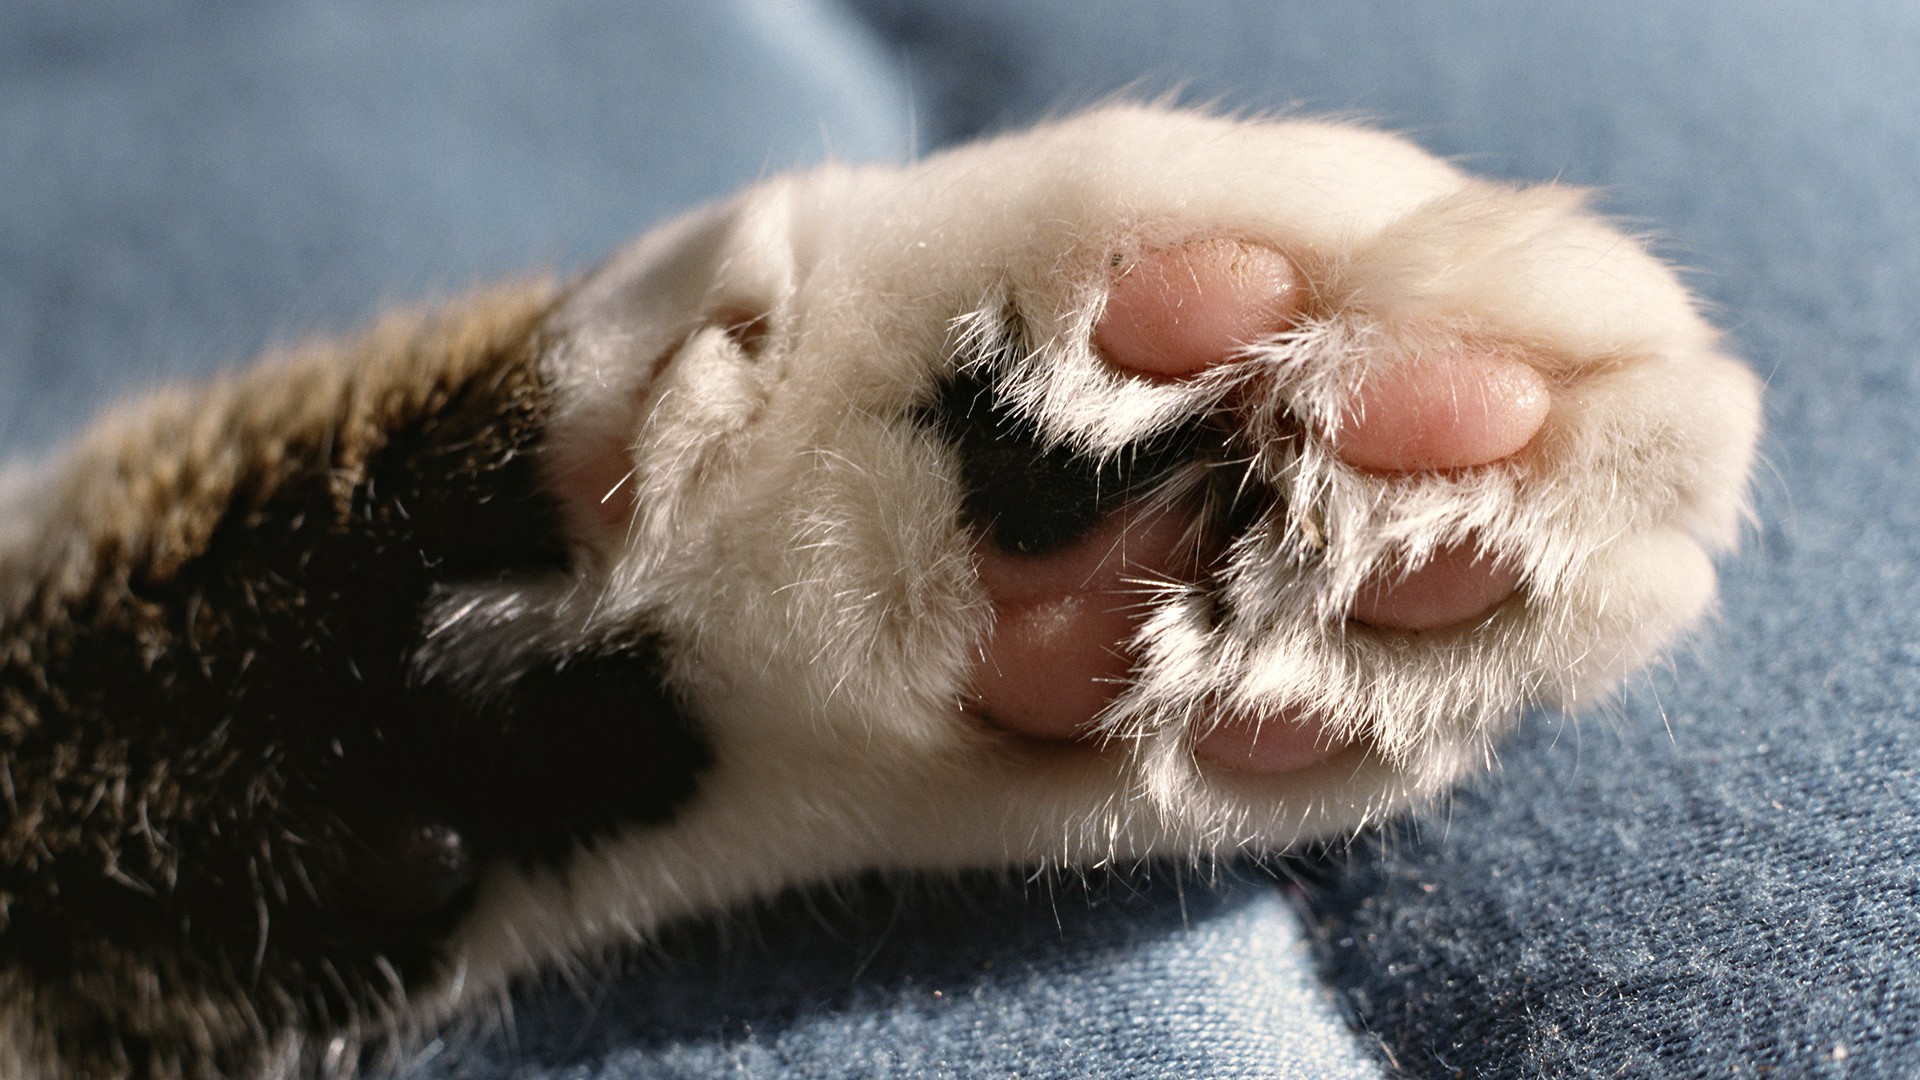 Cats Paws Wallpaper 1920x1080 Cats Paws